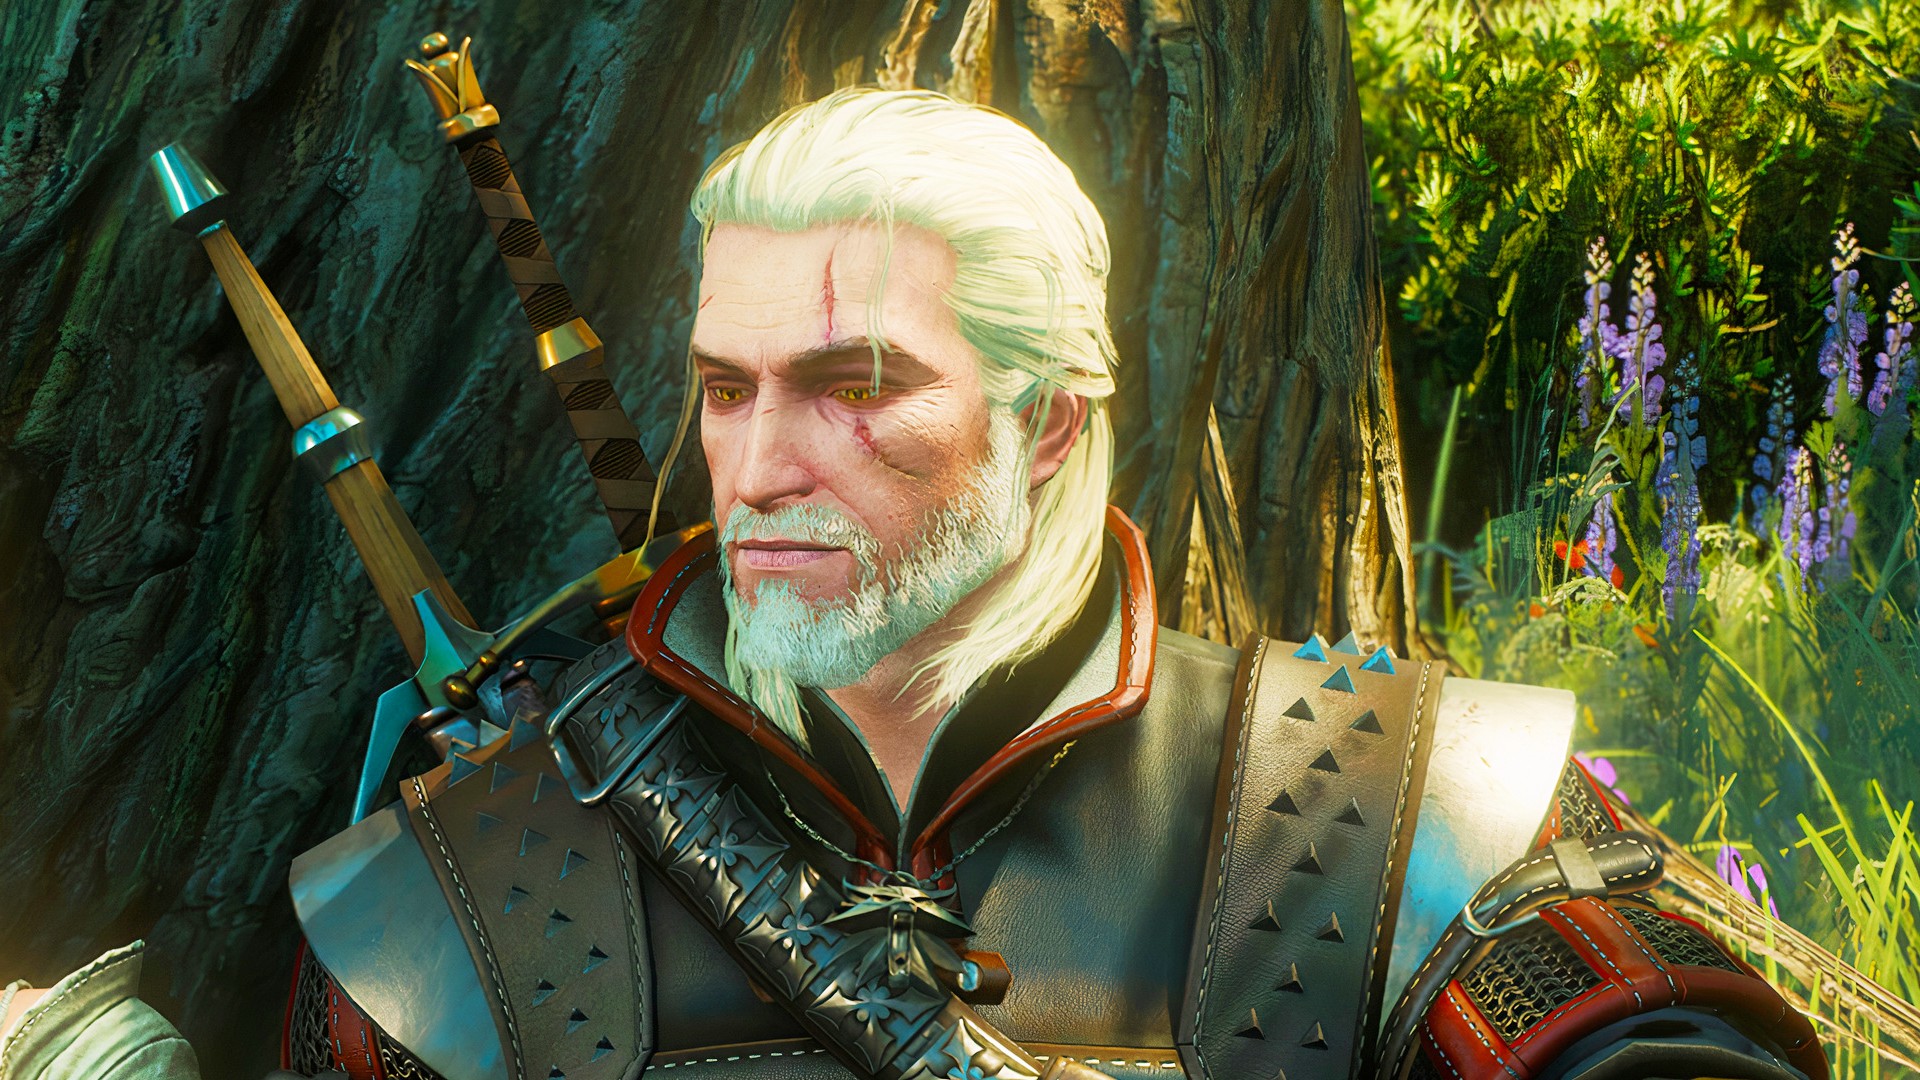 The Witcher 3 next-gen update is also being updated, but not by CDPR